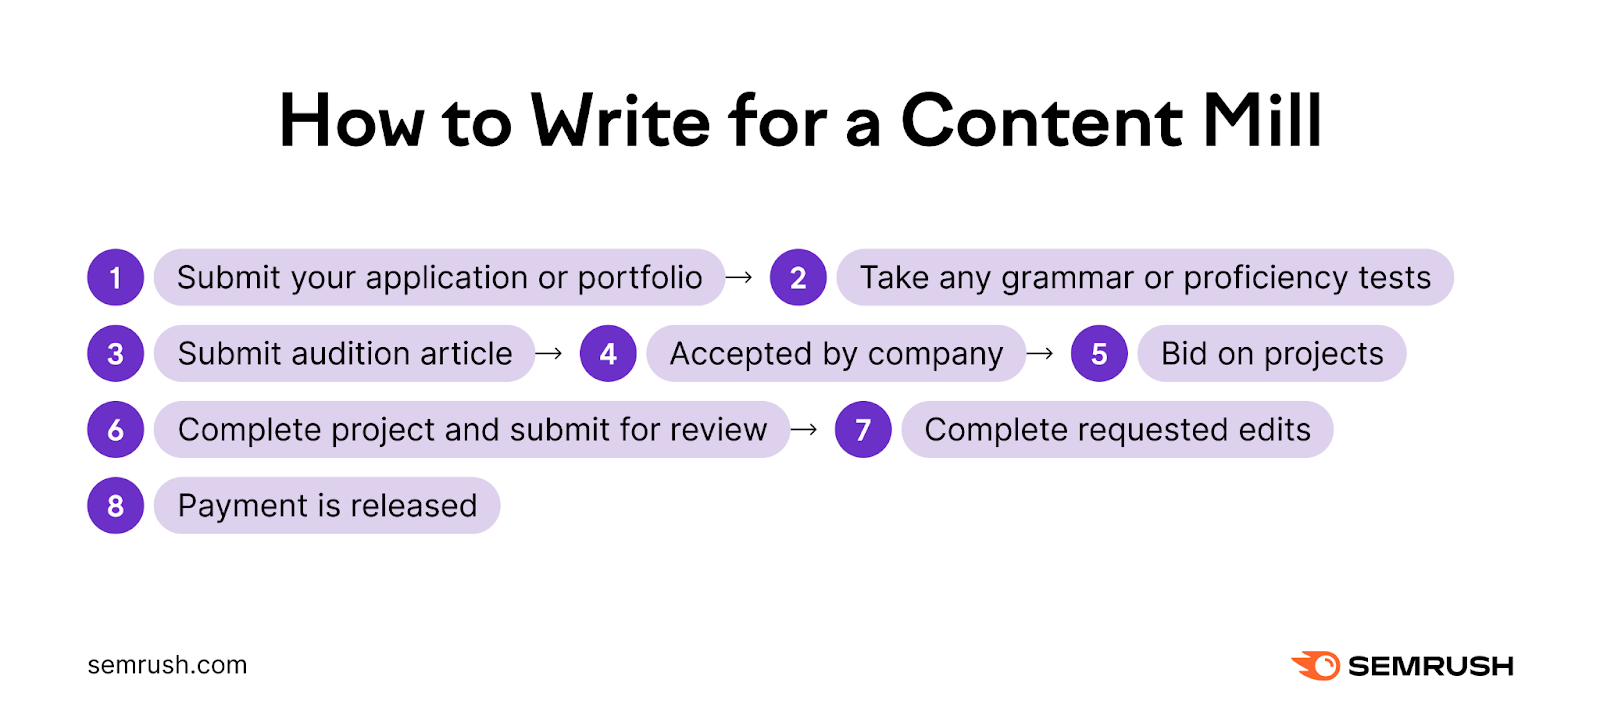 an infographic on how to write for a content mill